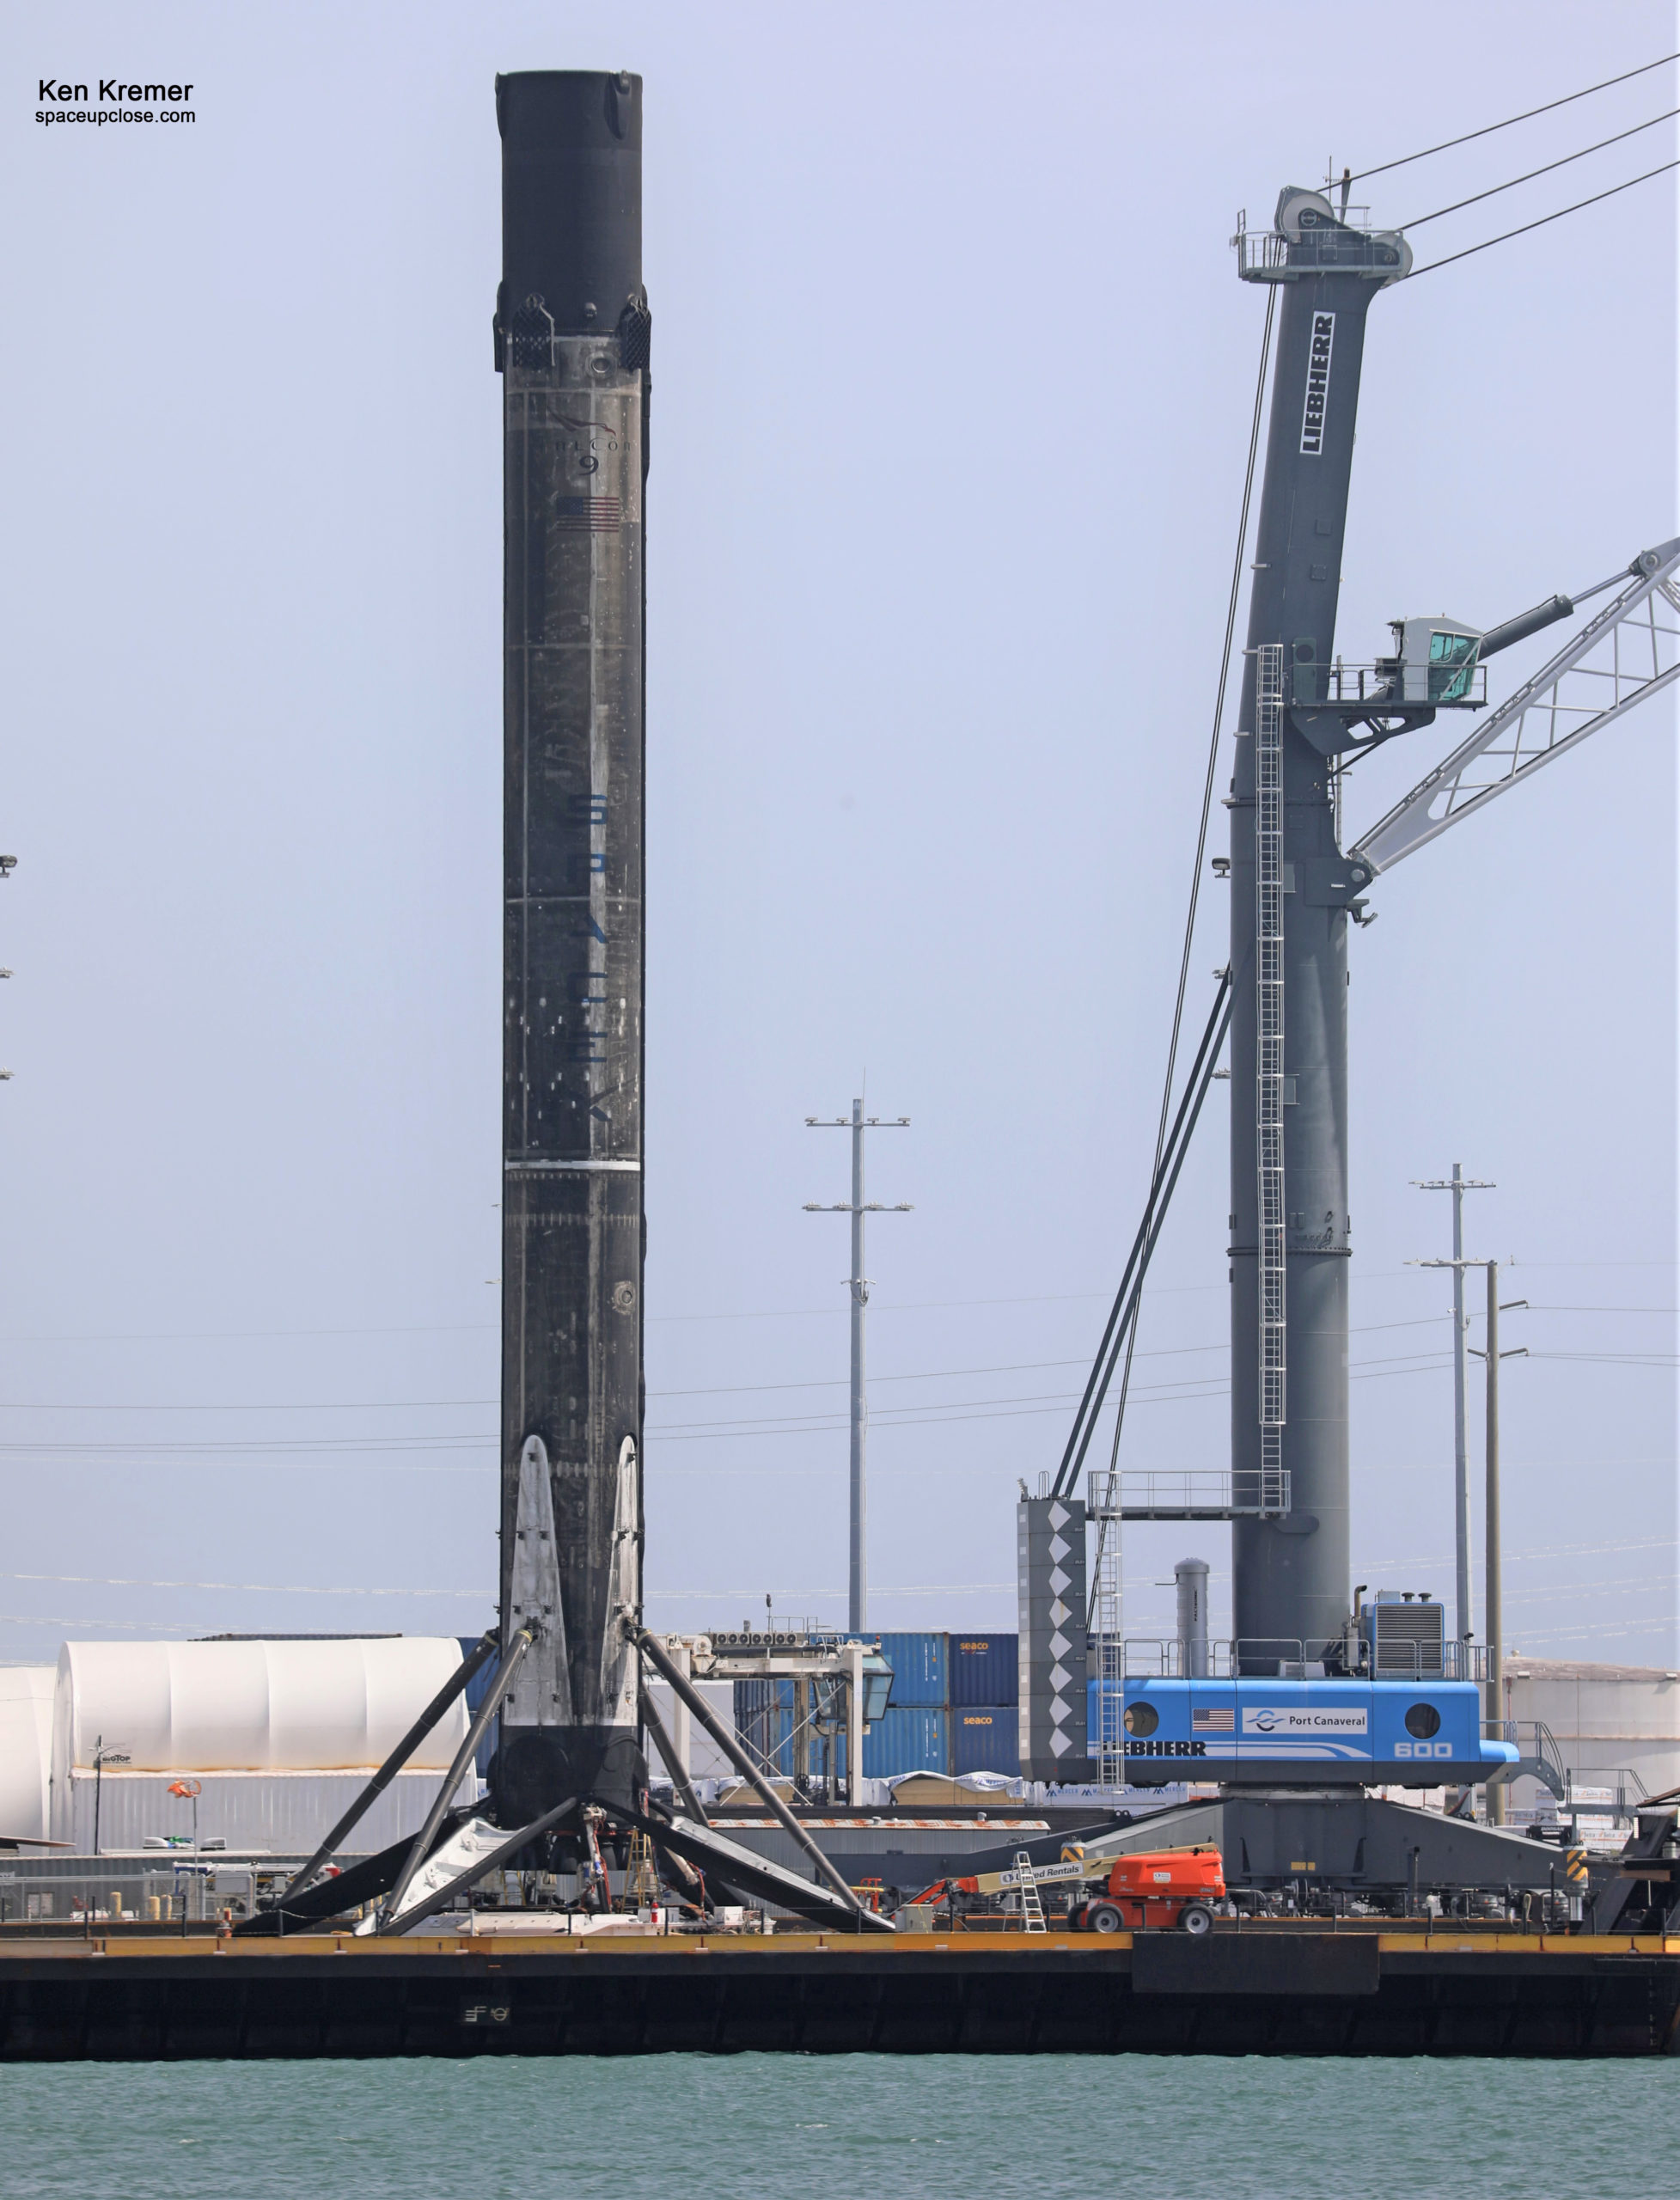 ‘Super Sooty’ – 1st 12x Flown/Landed SpaceX Falcon 9 Booster Returns to Port Canaveral: Photos